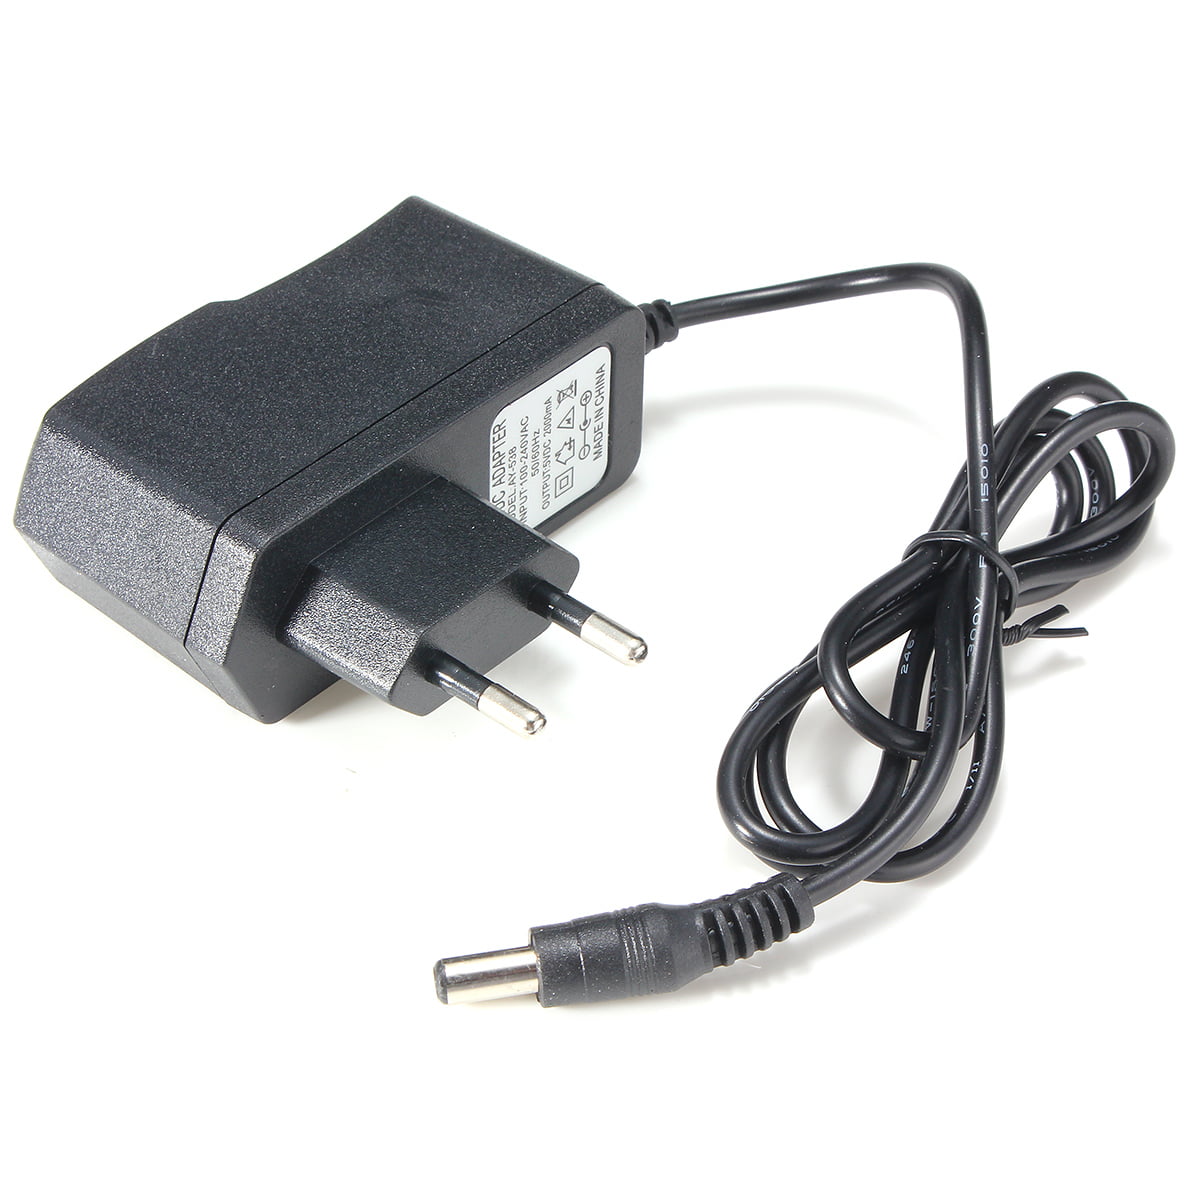 5.5mmx2.1mm AC100-240V to DC 5V 2A Power Supply Wall Charger Adapter ...